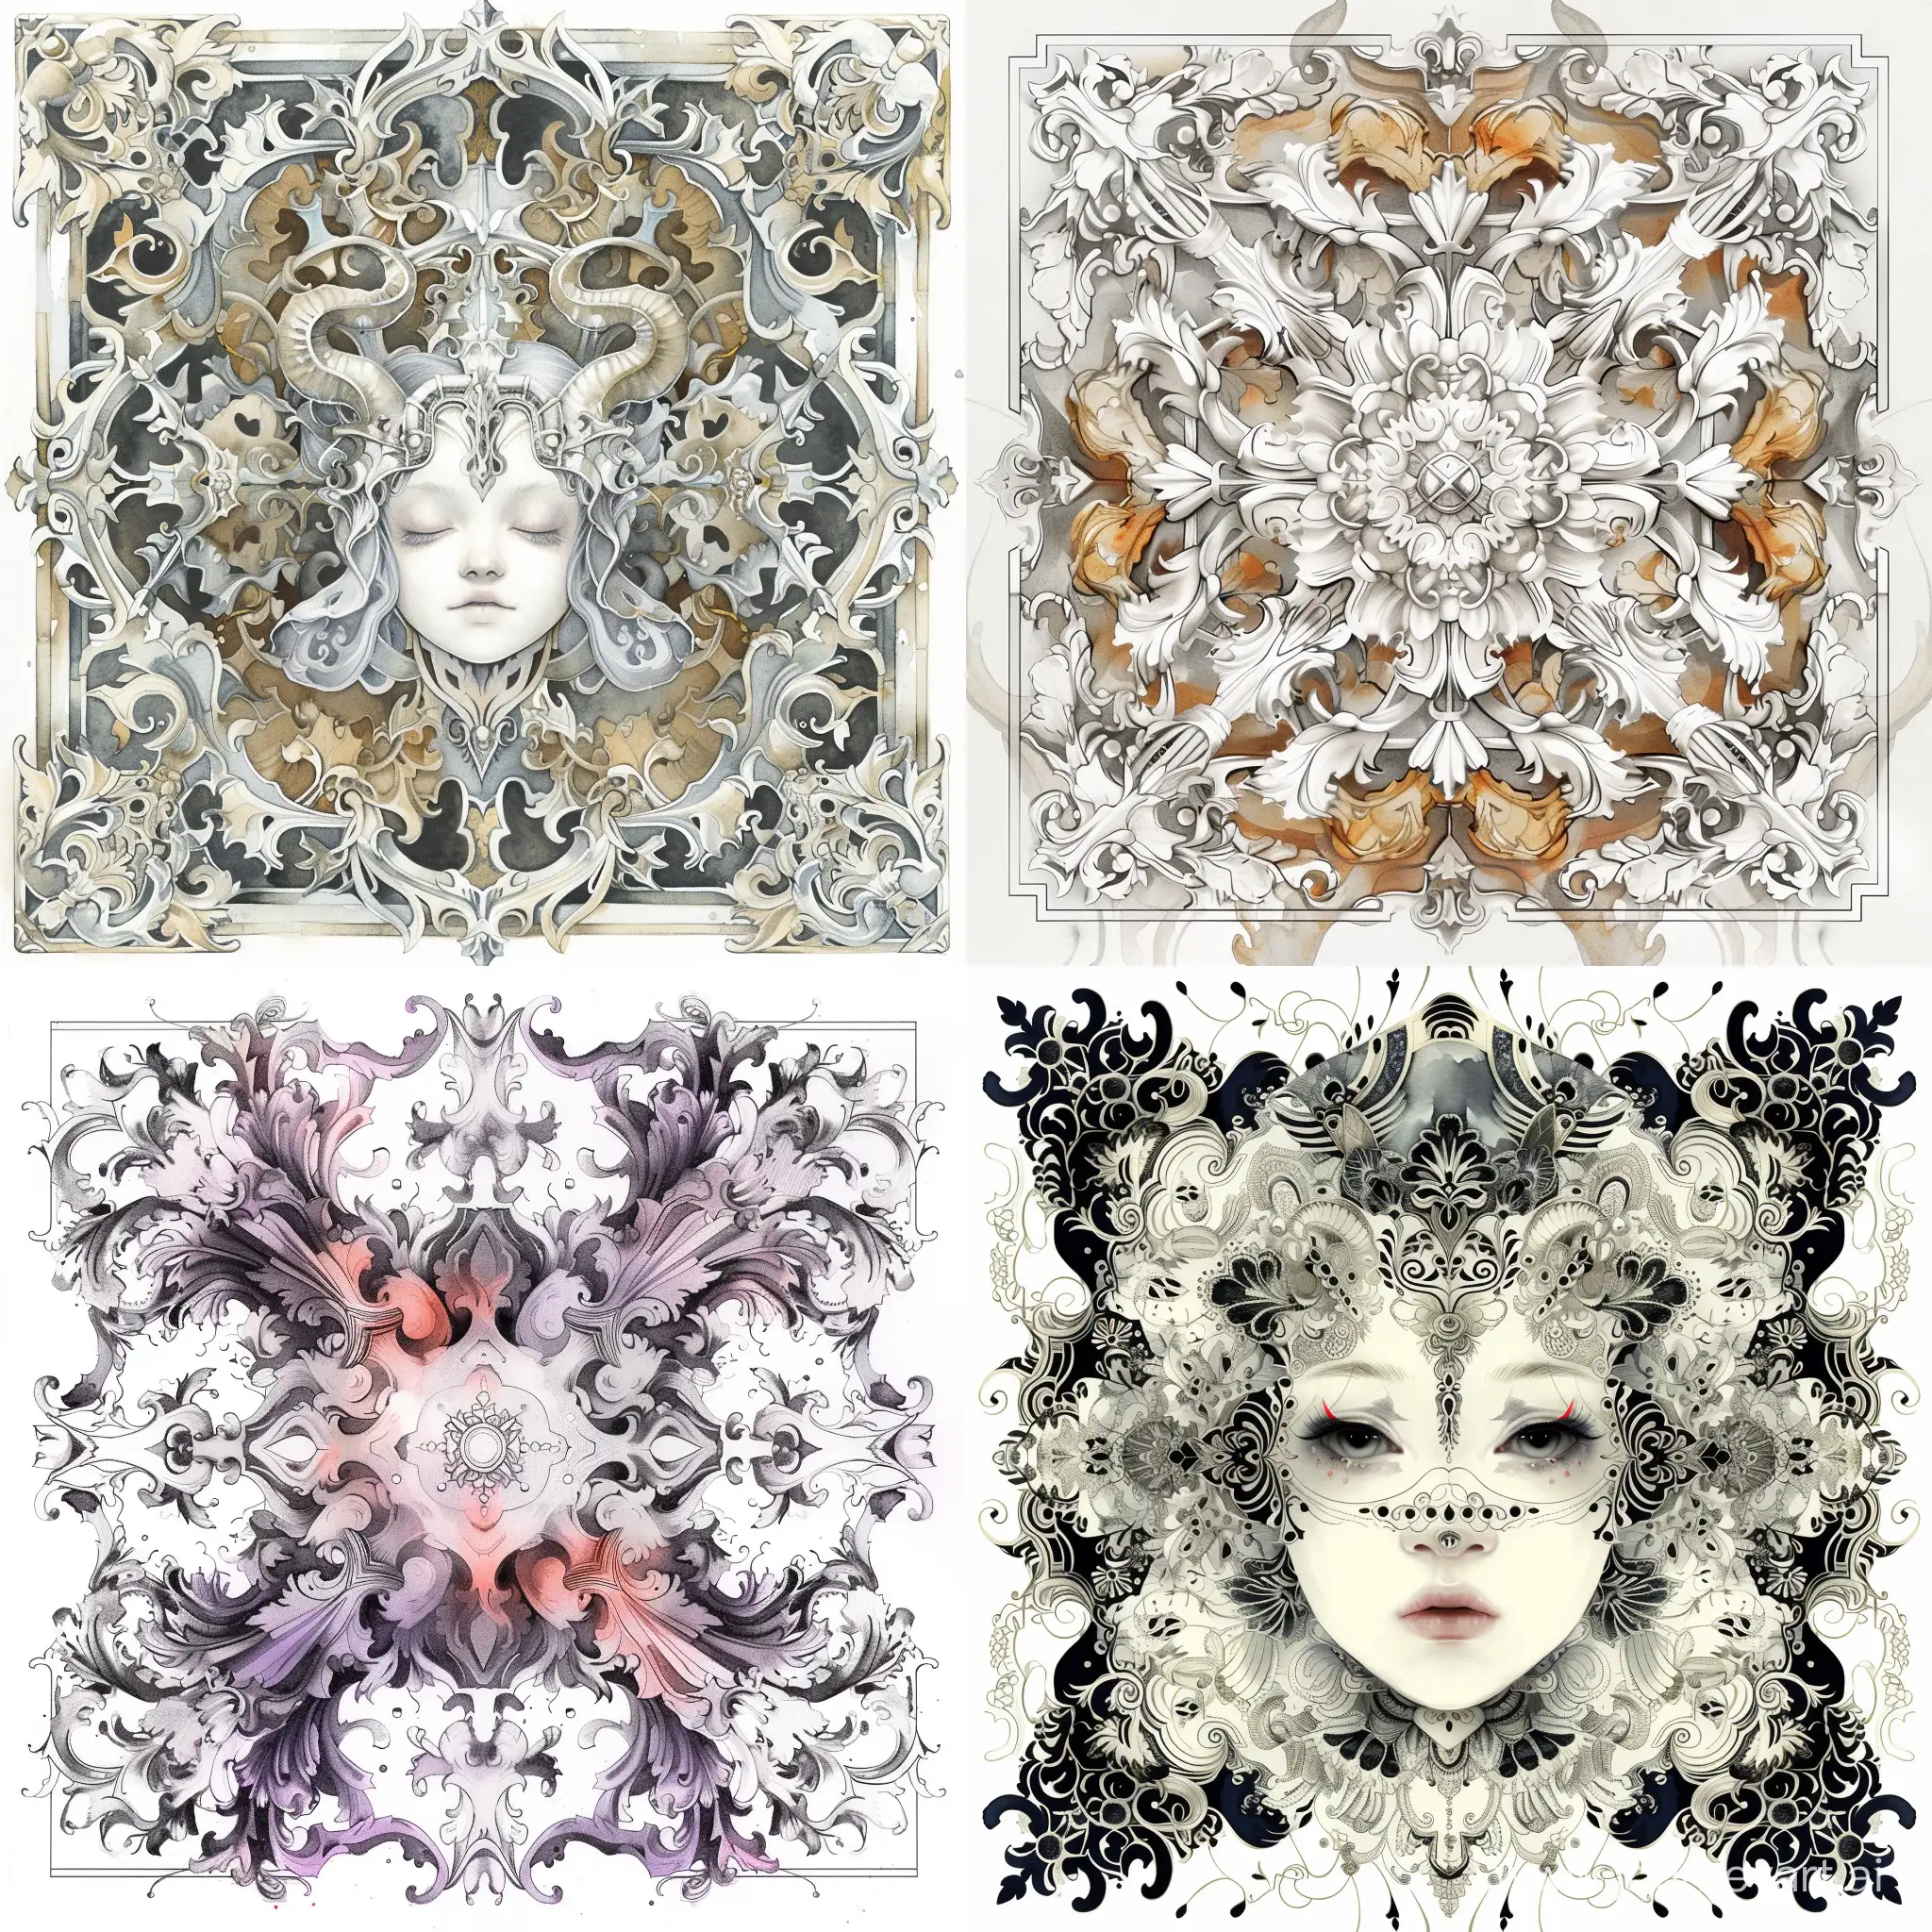 Symmetrical geometric, square, background, detailed, stylized caricature, lots of details, lots of white, baroque, Victor Ngai style, watercolor, decorative, flat drawing